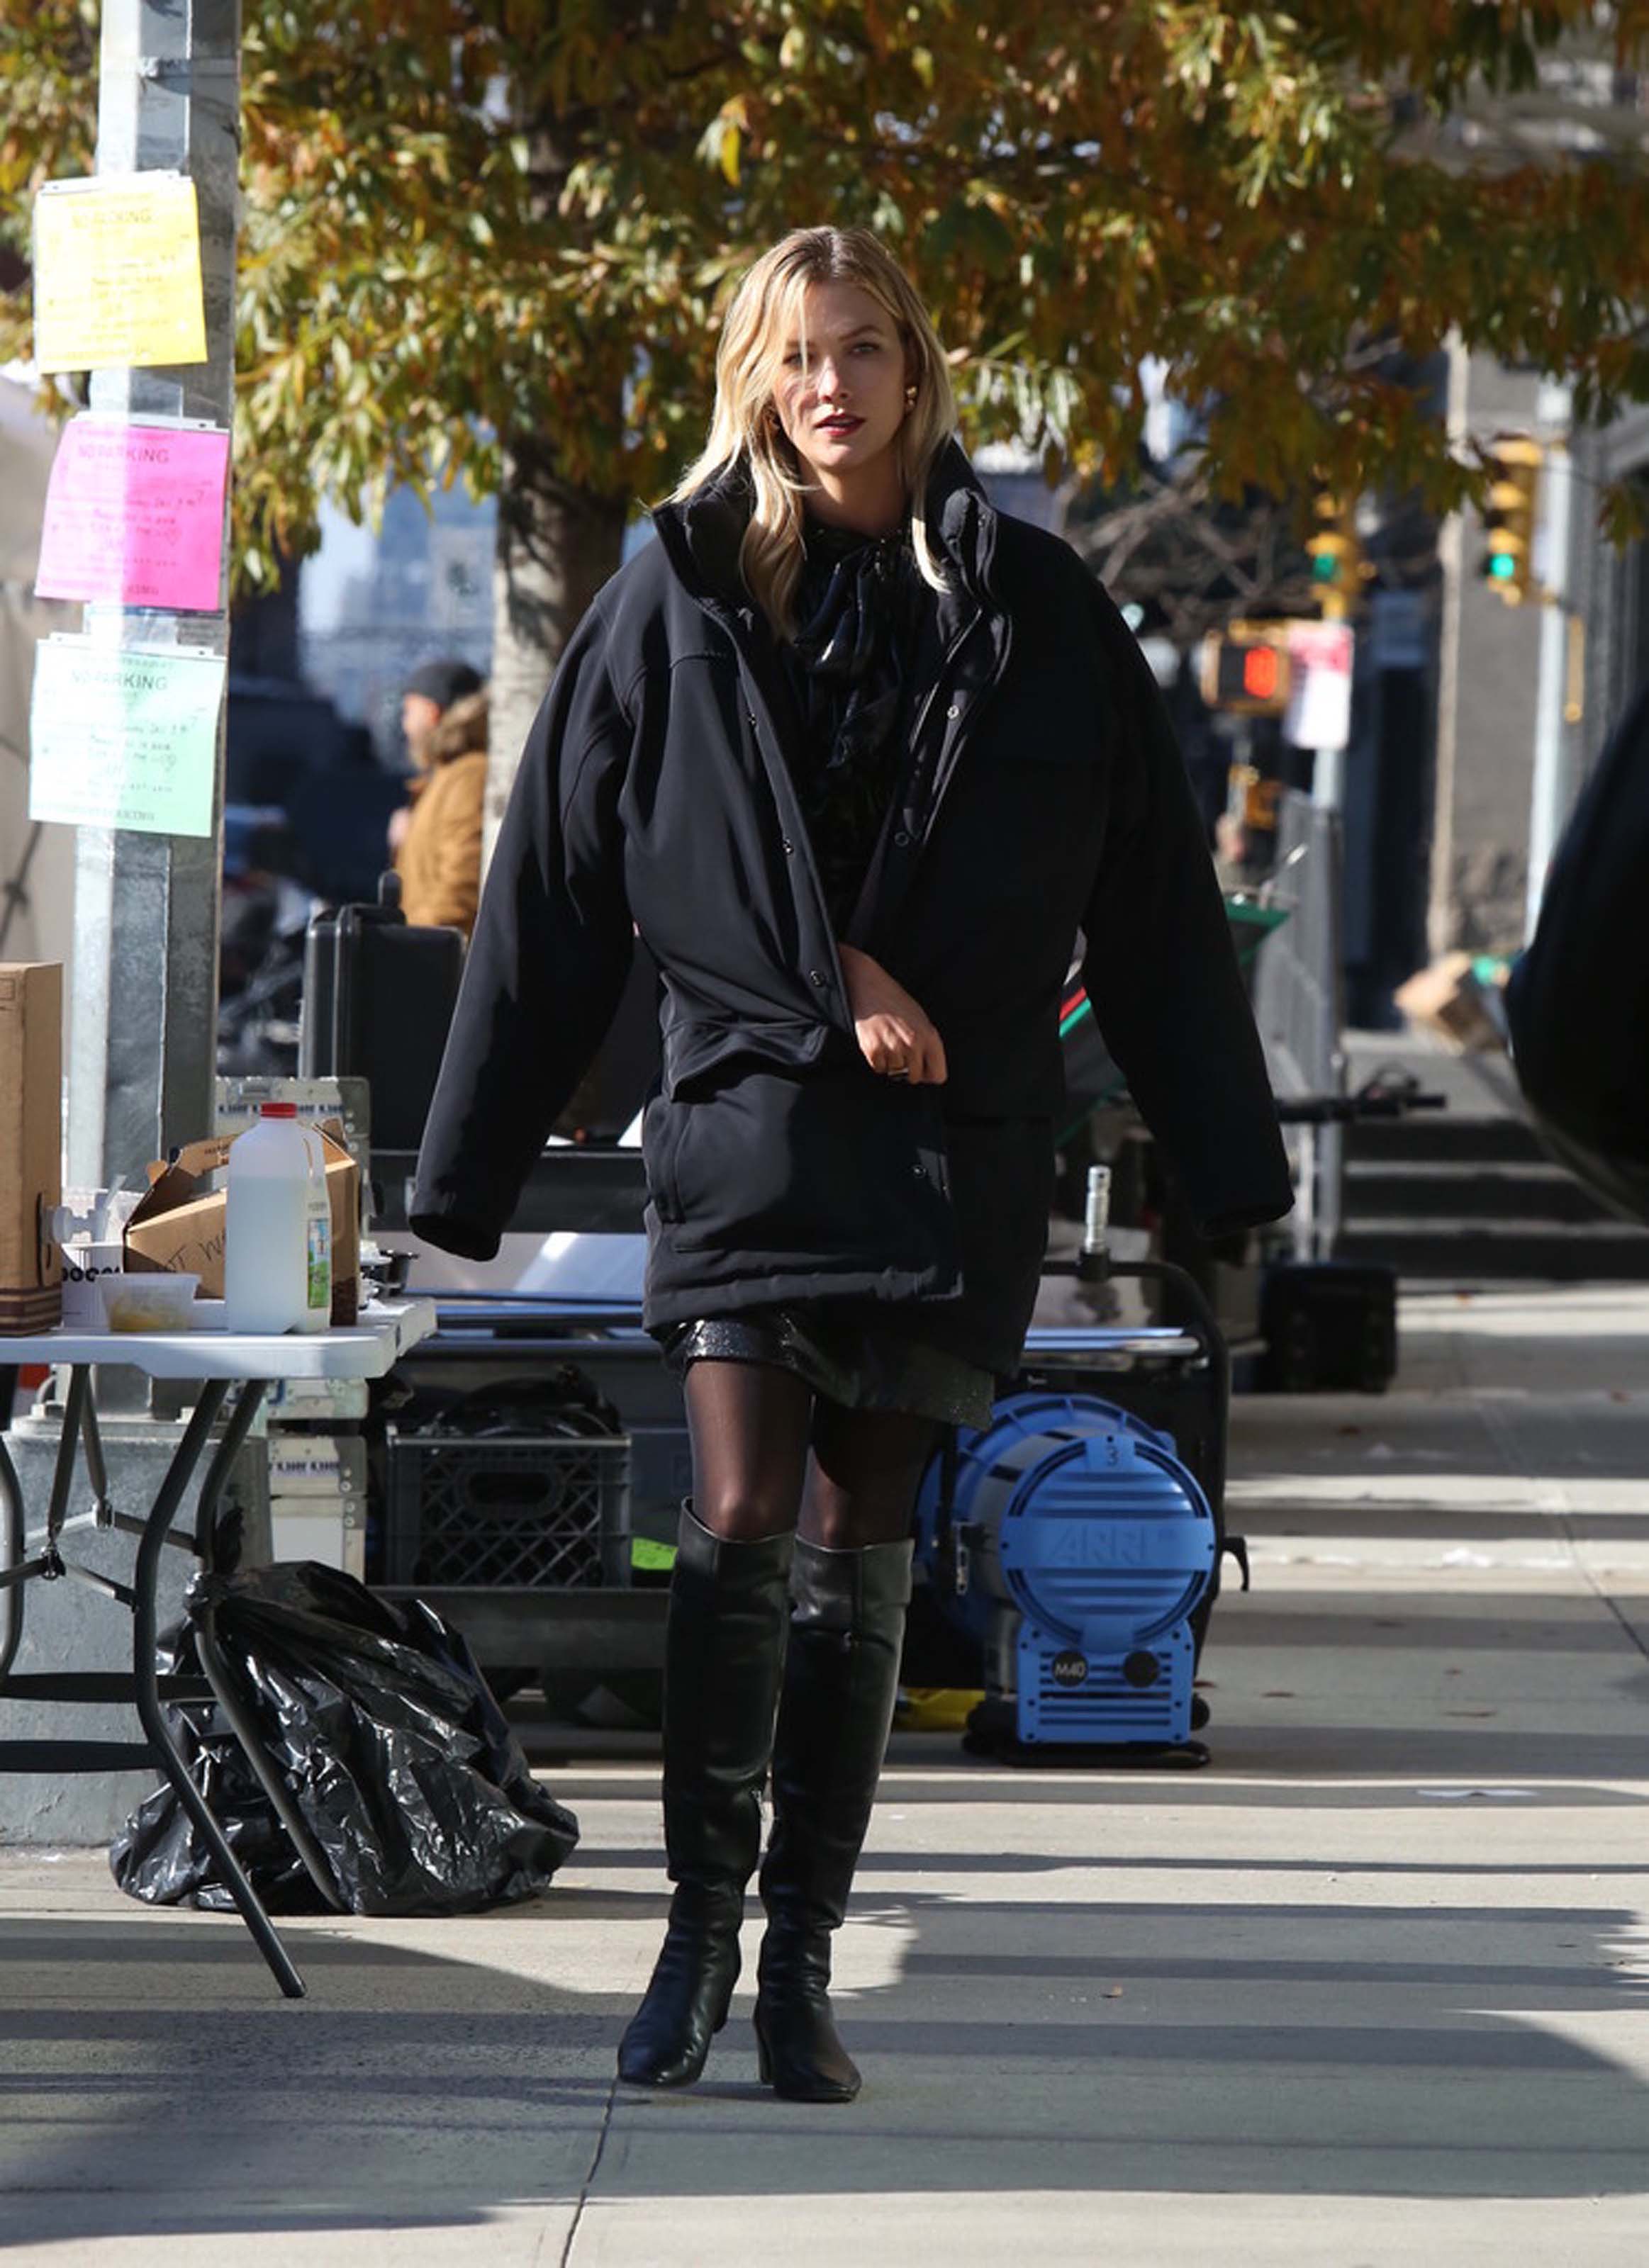 Karlie Kloss at a photoshoot in NYC